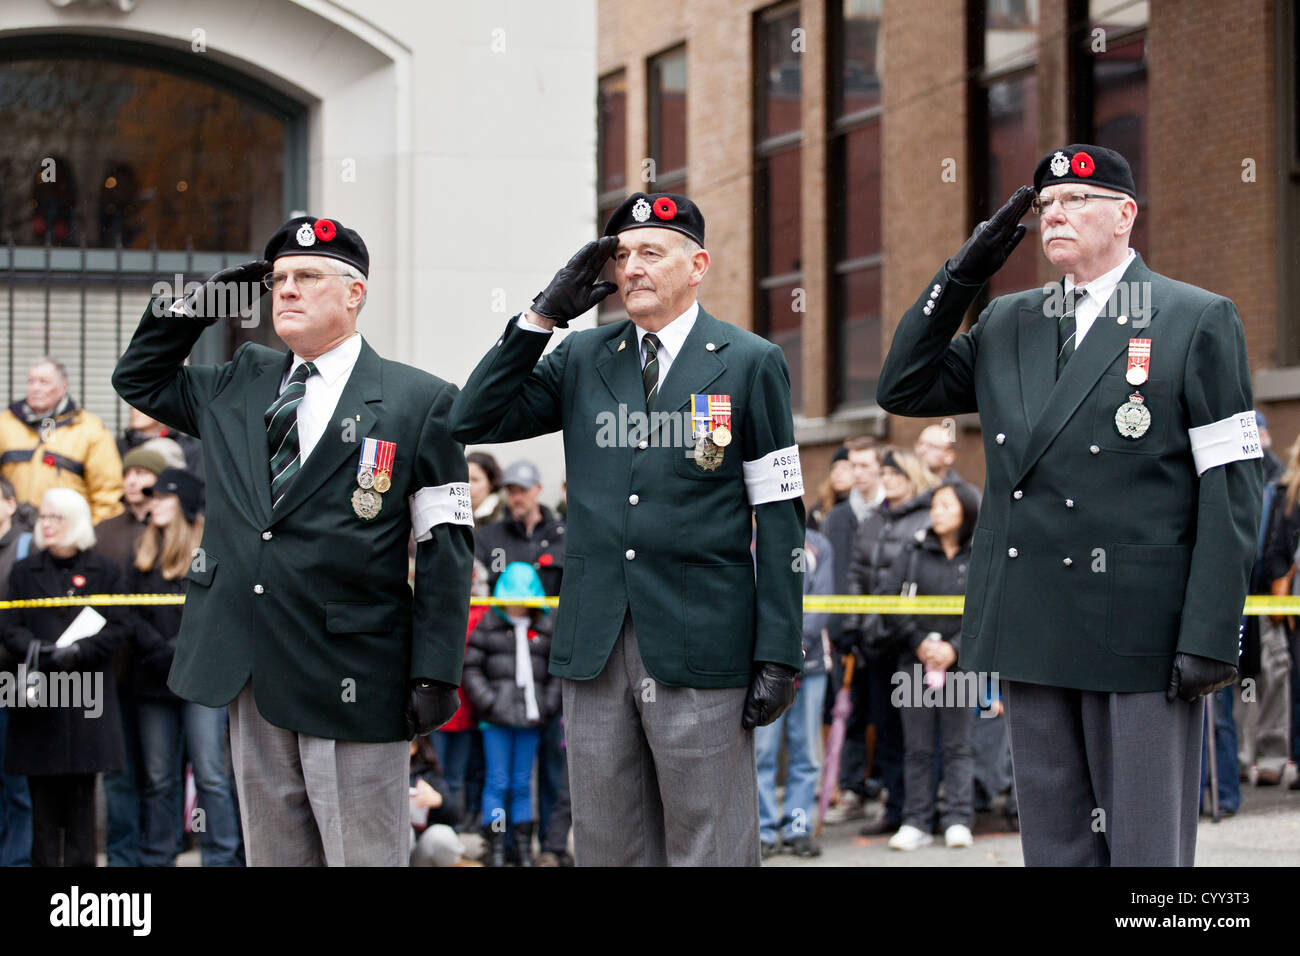 Three ex-servicemen stand on guard on Remembrance day near the Cenotaph in Vancouver's Victory Square. Stock Photo